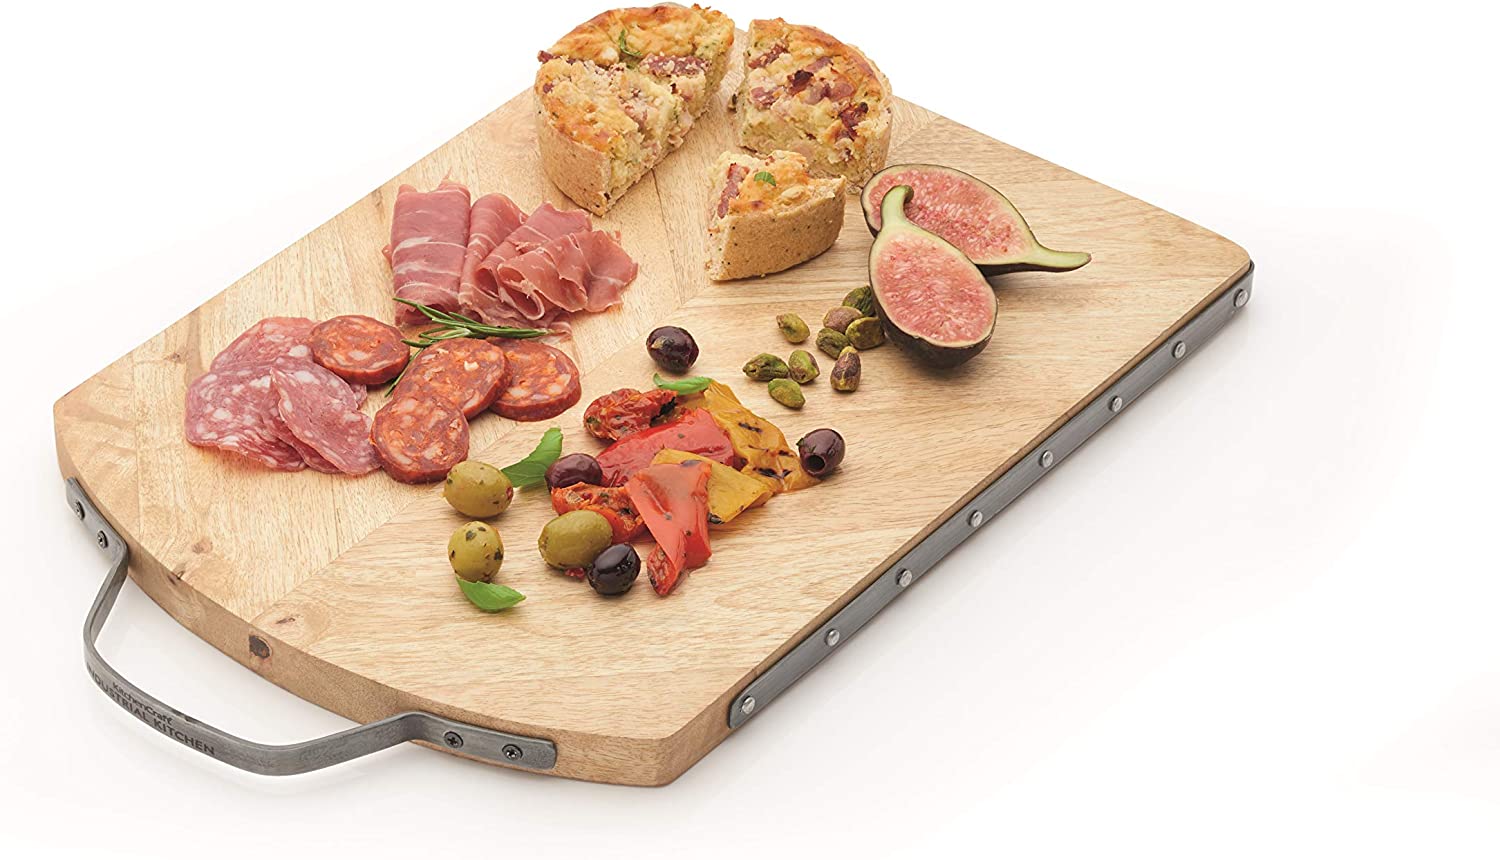 KitchenCraft 41 x 26 cm Wooden Chopping Board with Iron Handle